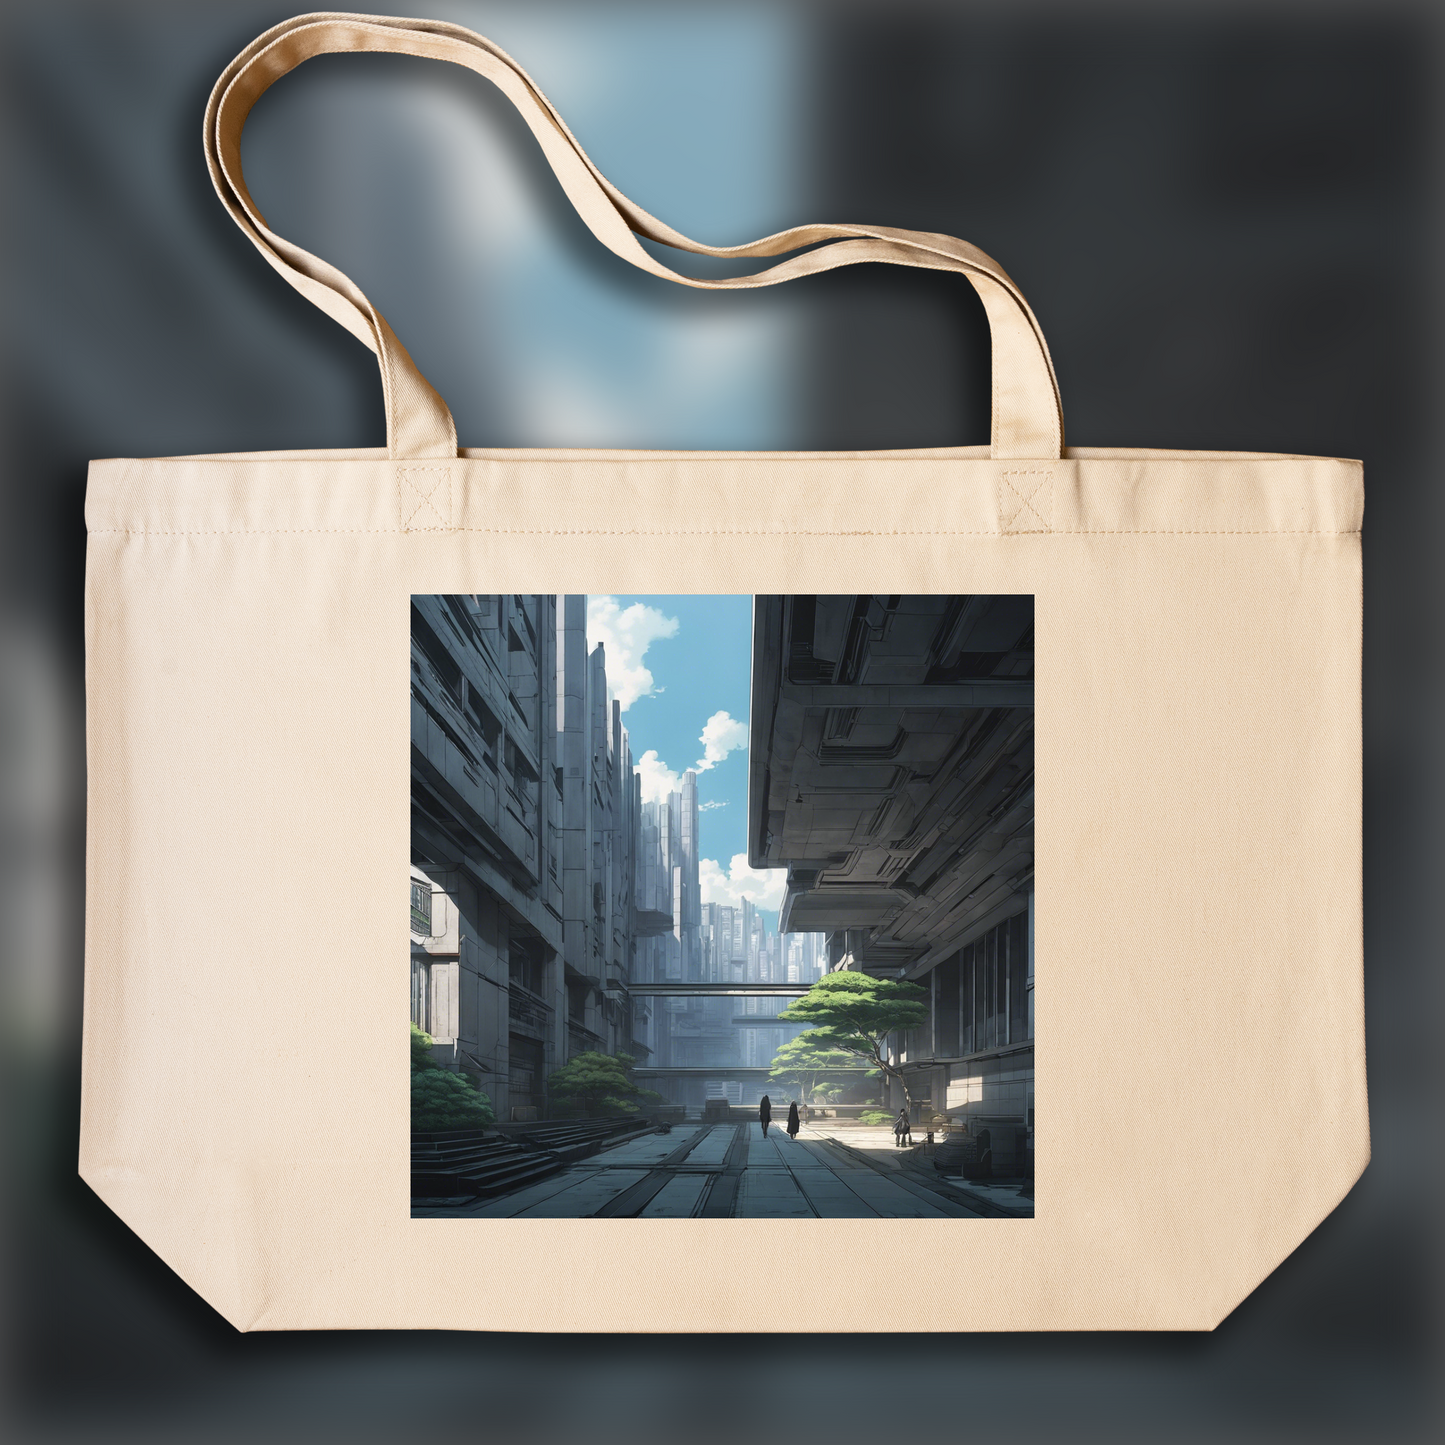 Tote bag IA - Ghost in the shell, Brutalist architecture, city - 1186372846